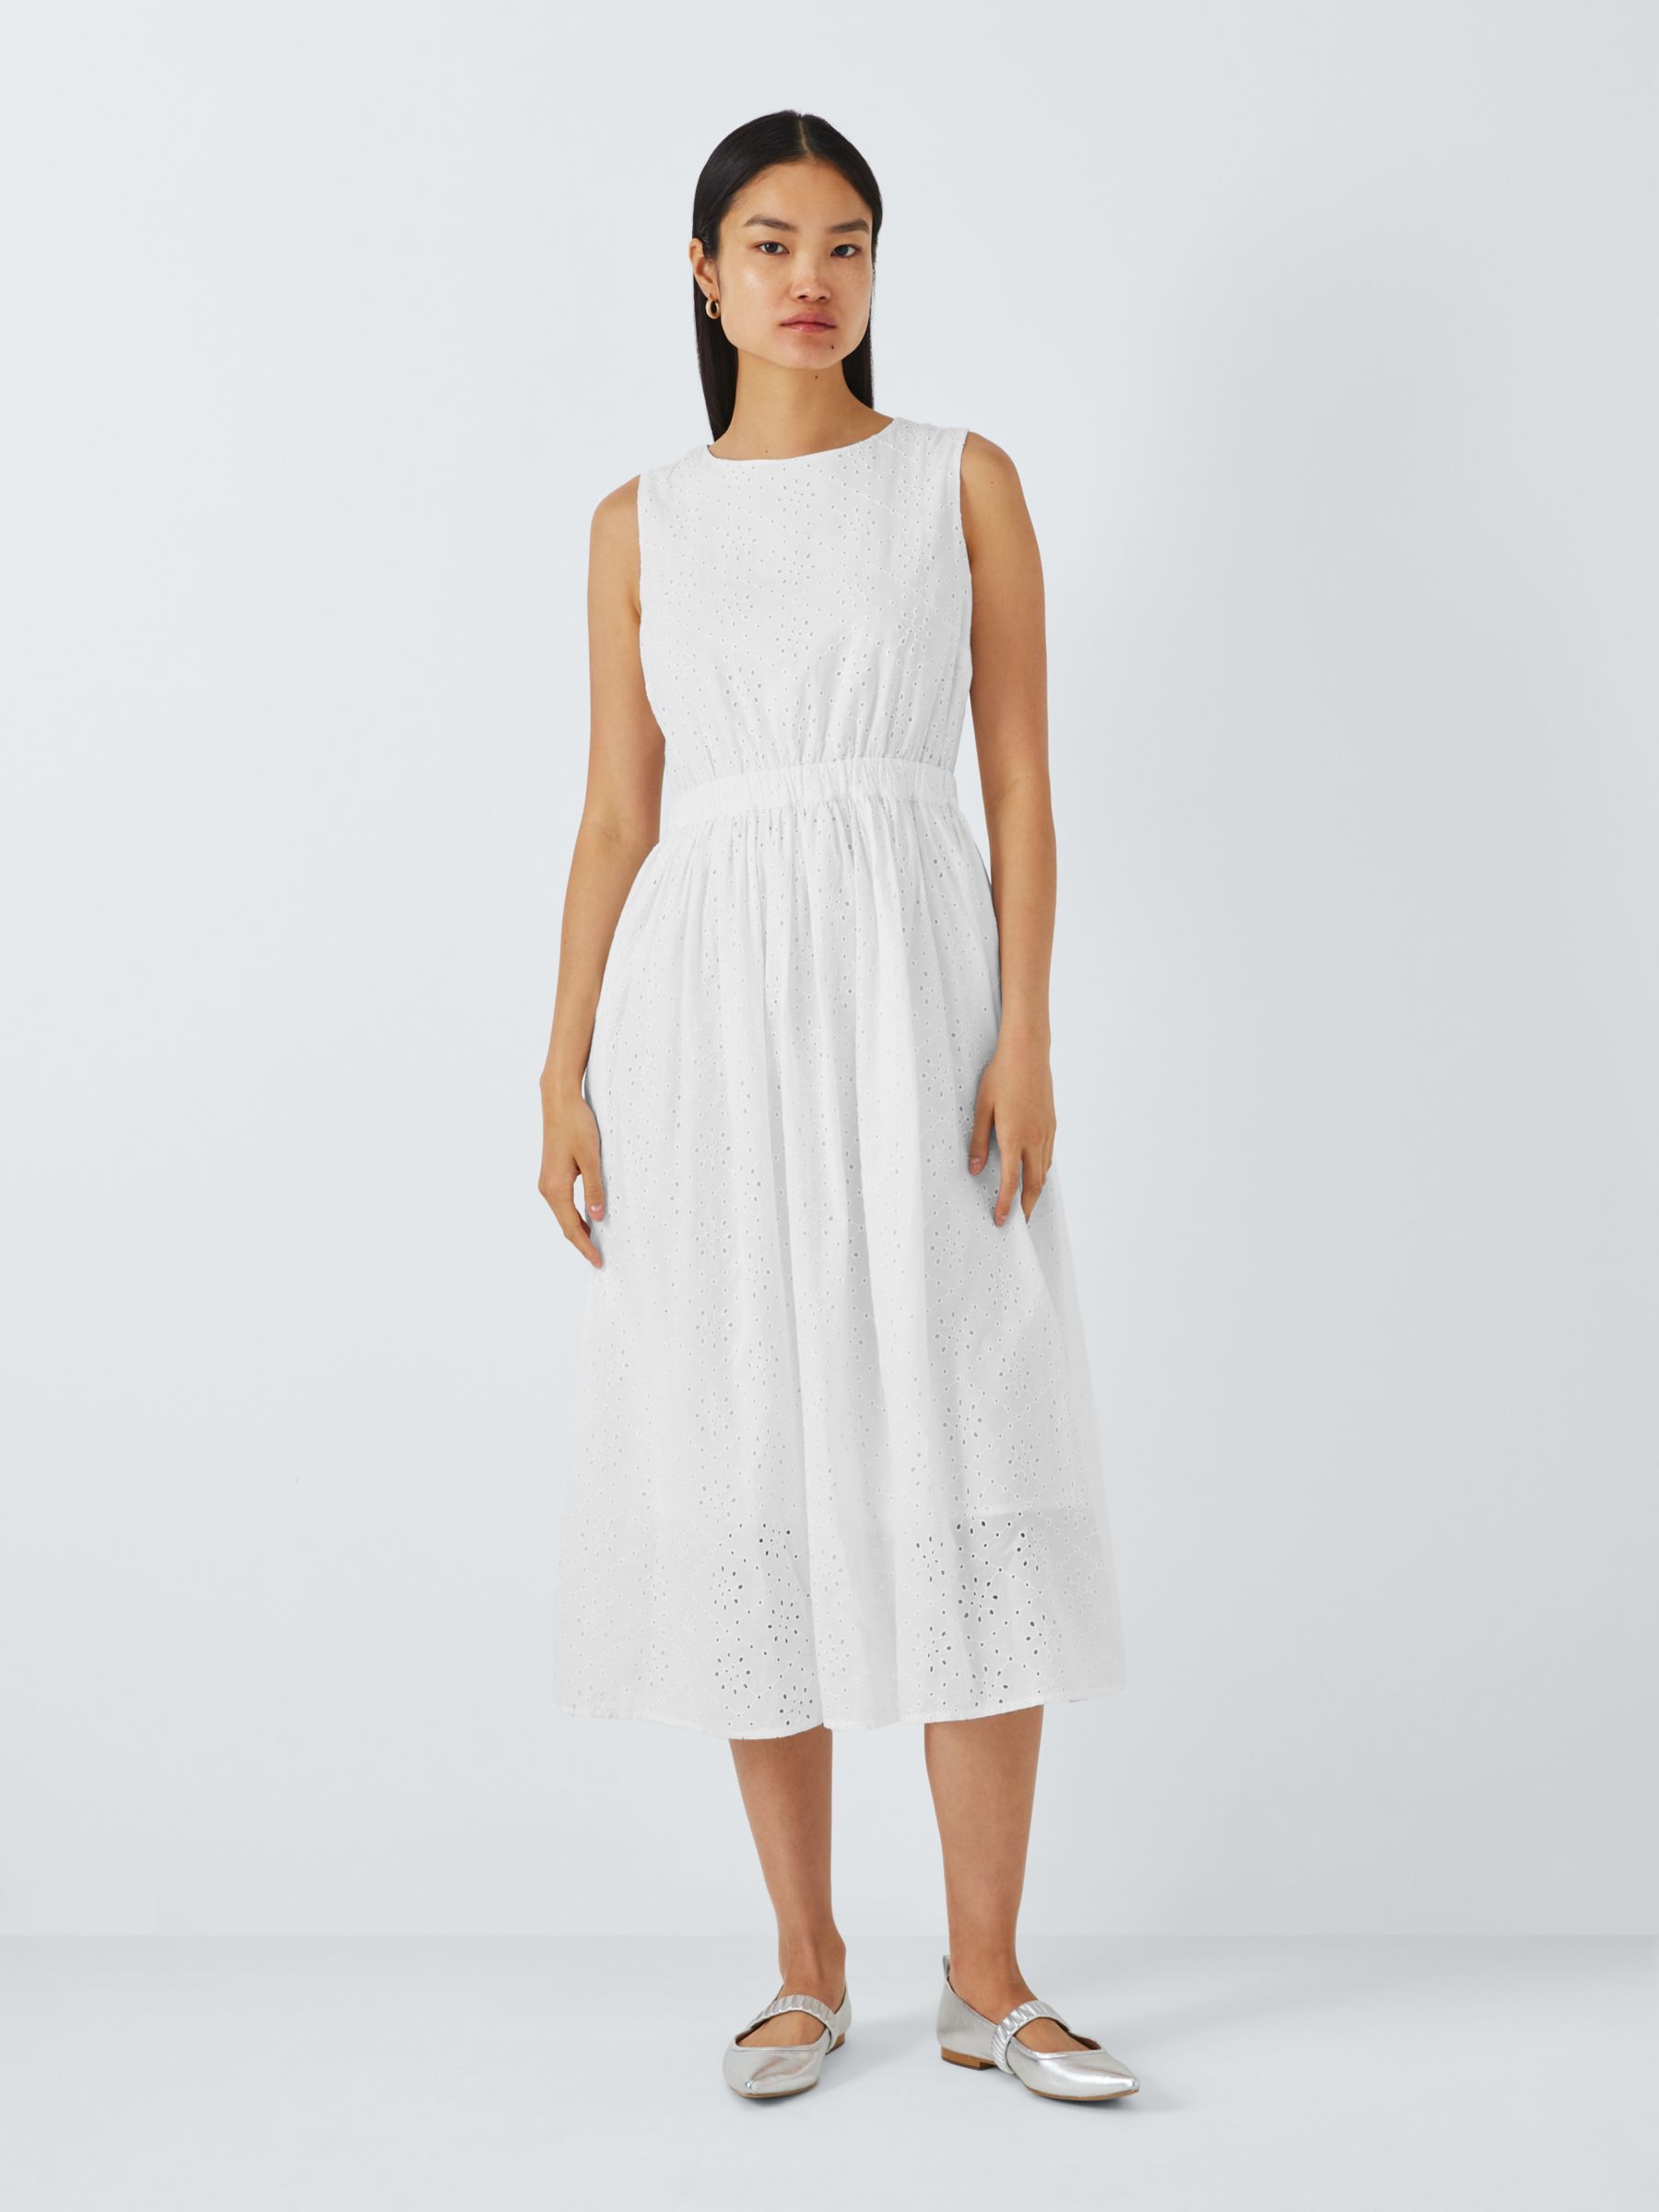 John Lewis ANYDAY Broderie Dress, White, 6